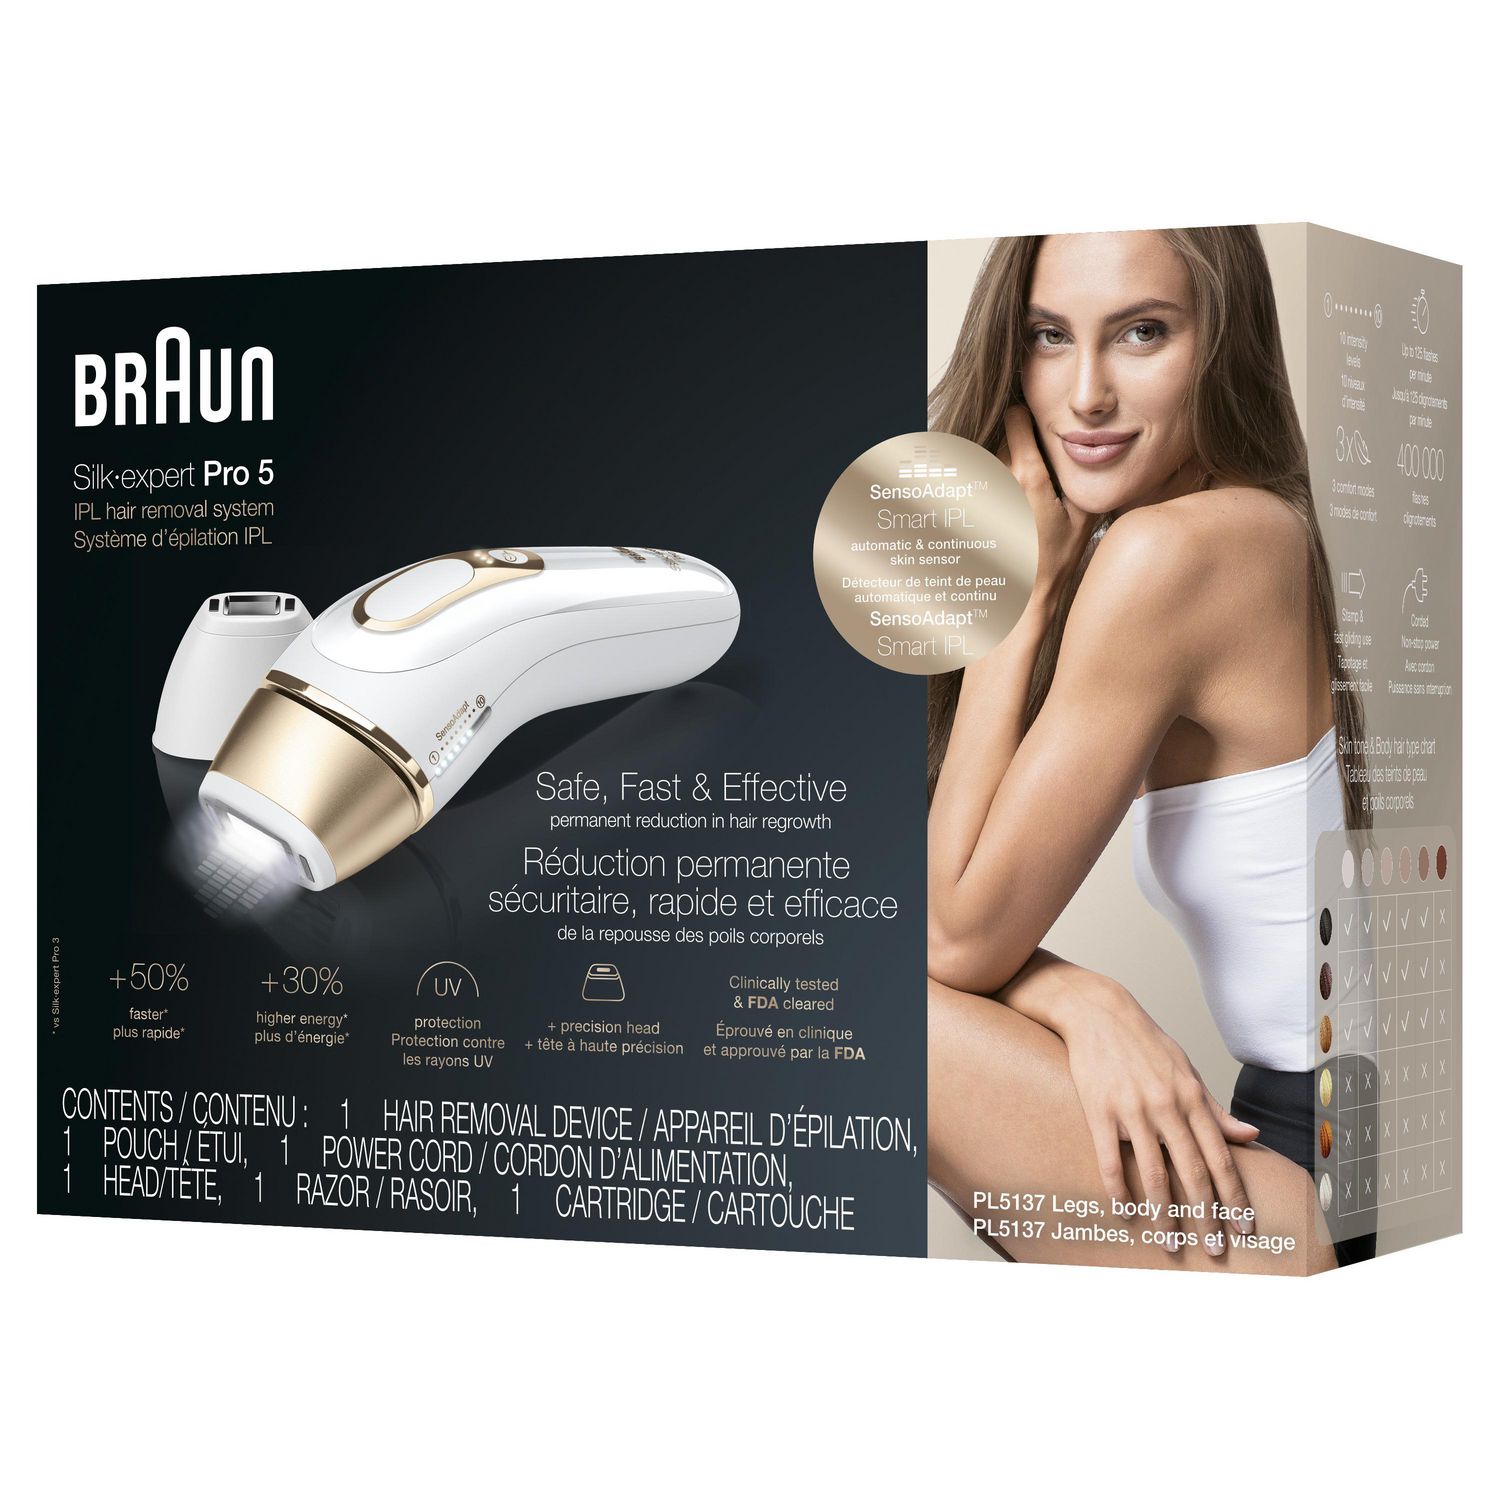 Braun Silk·expert Pro 5 PL5137 IPL, At-Home Hair Removal System, White&Gold